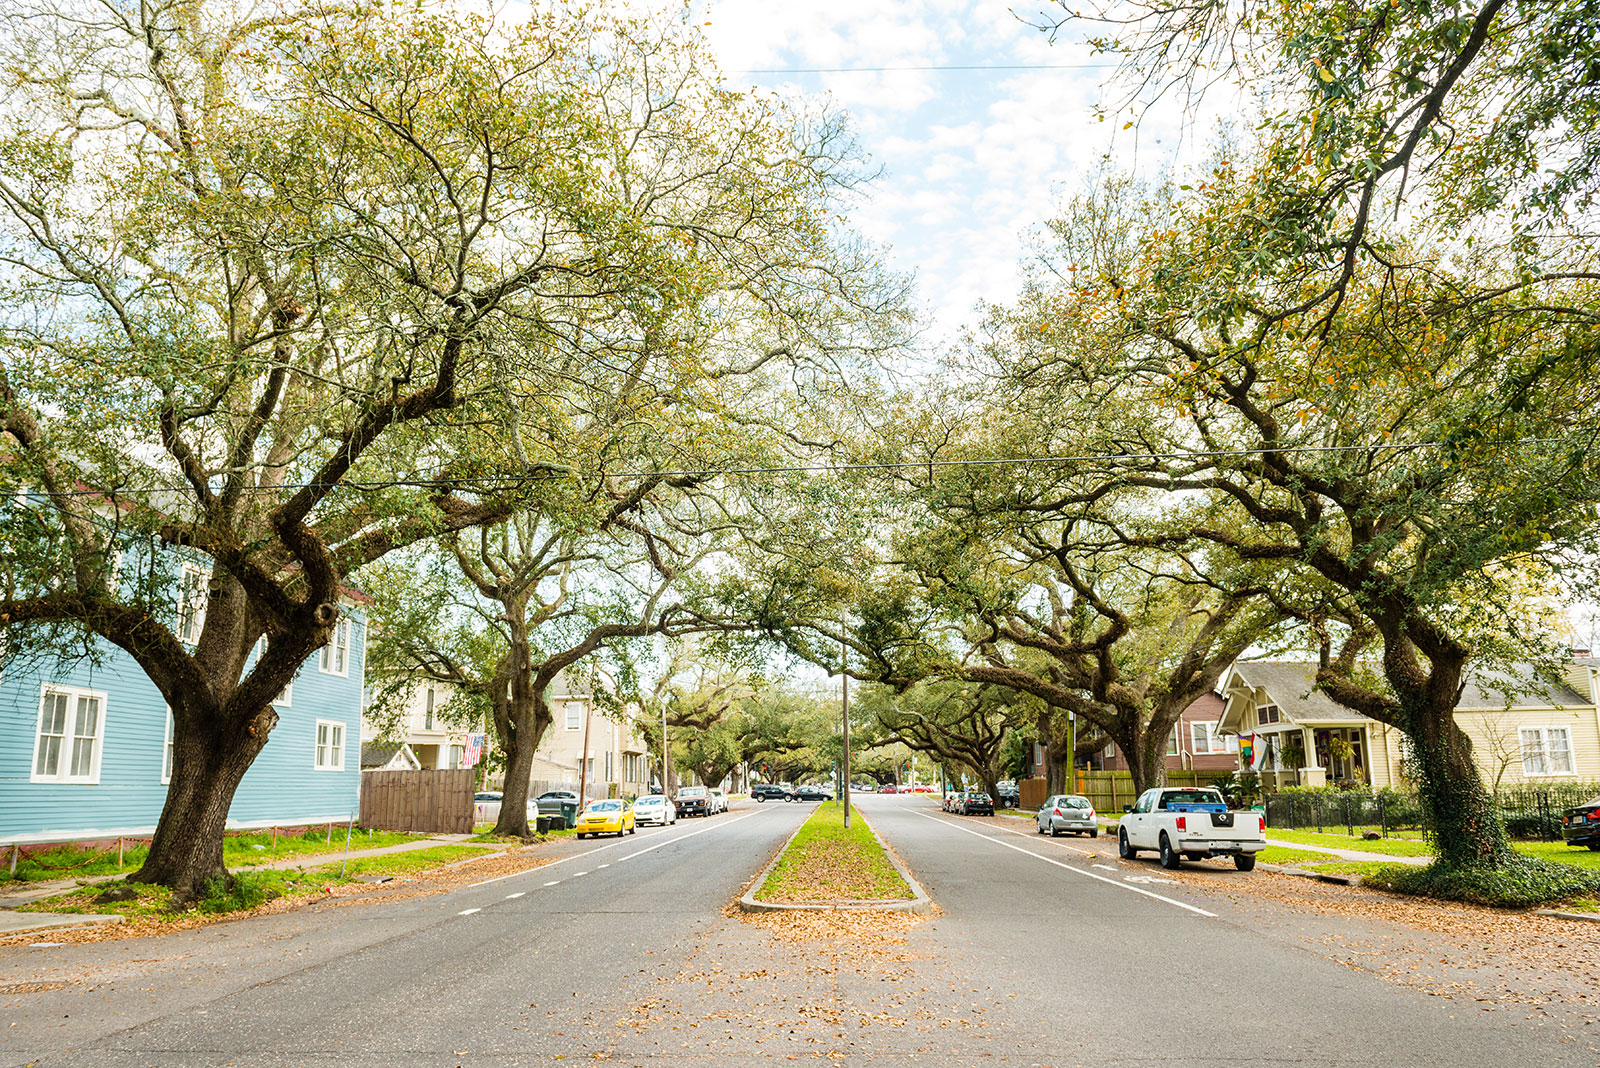 Leaf covered neighborhood streets in a New Orleans, LA suburb